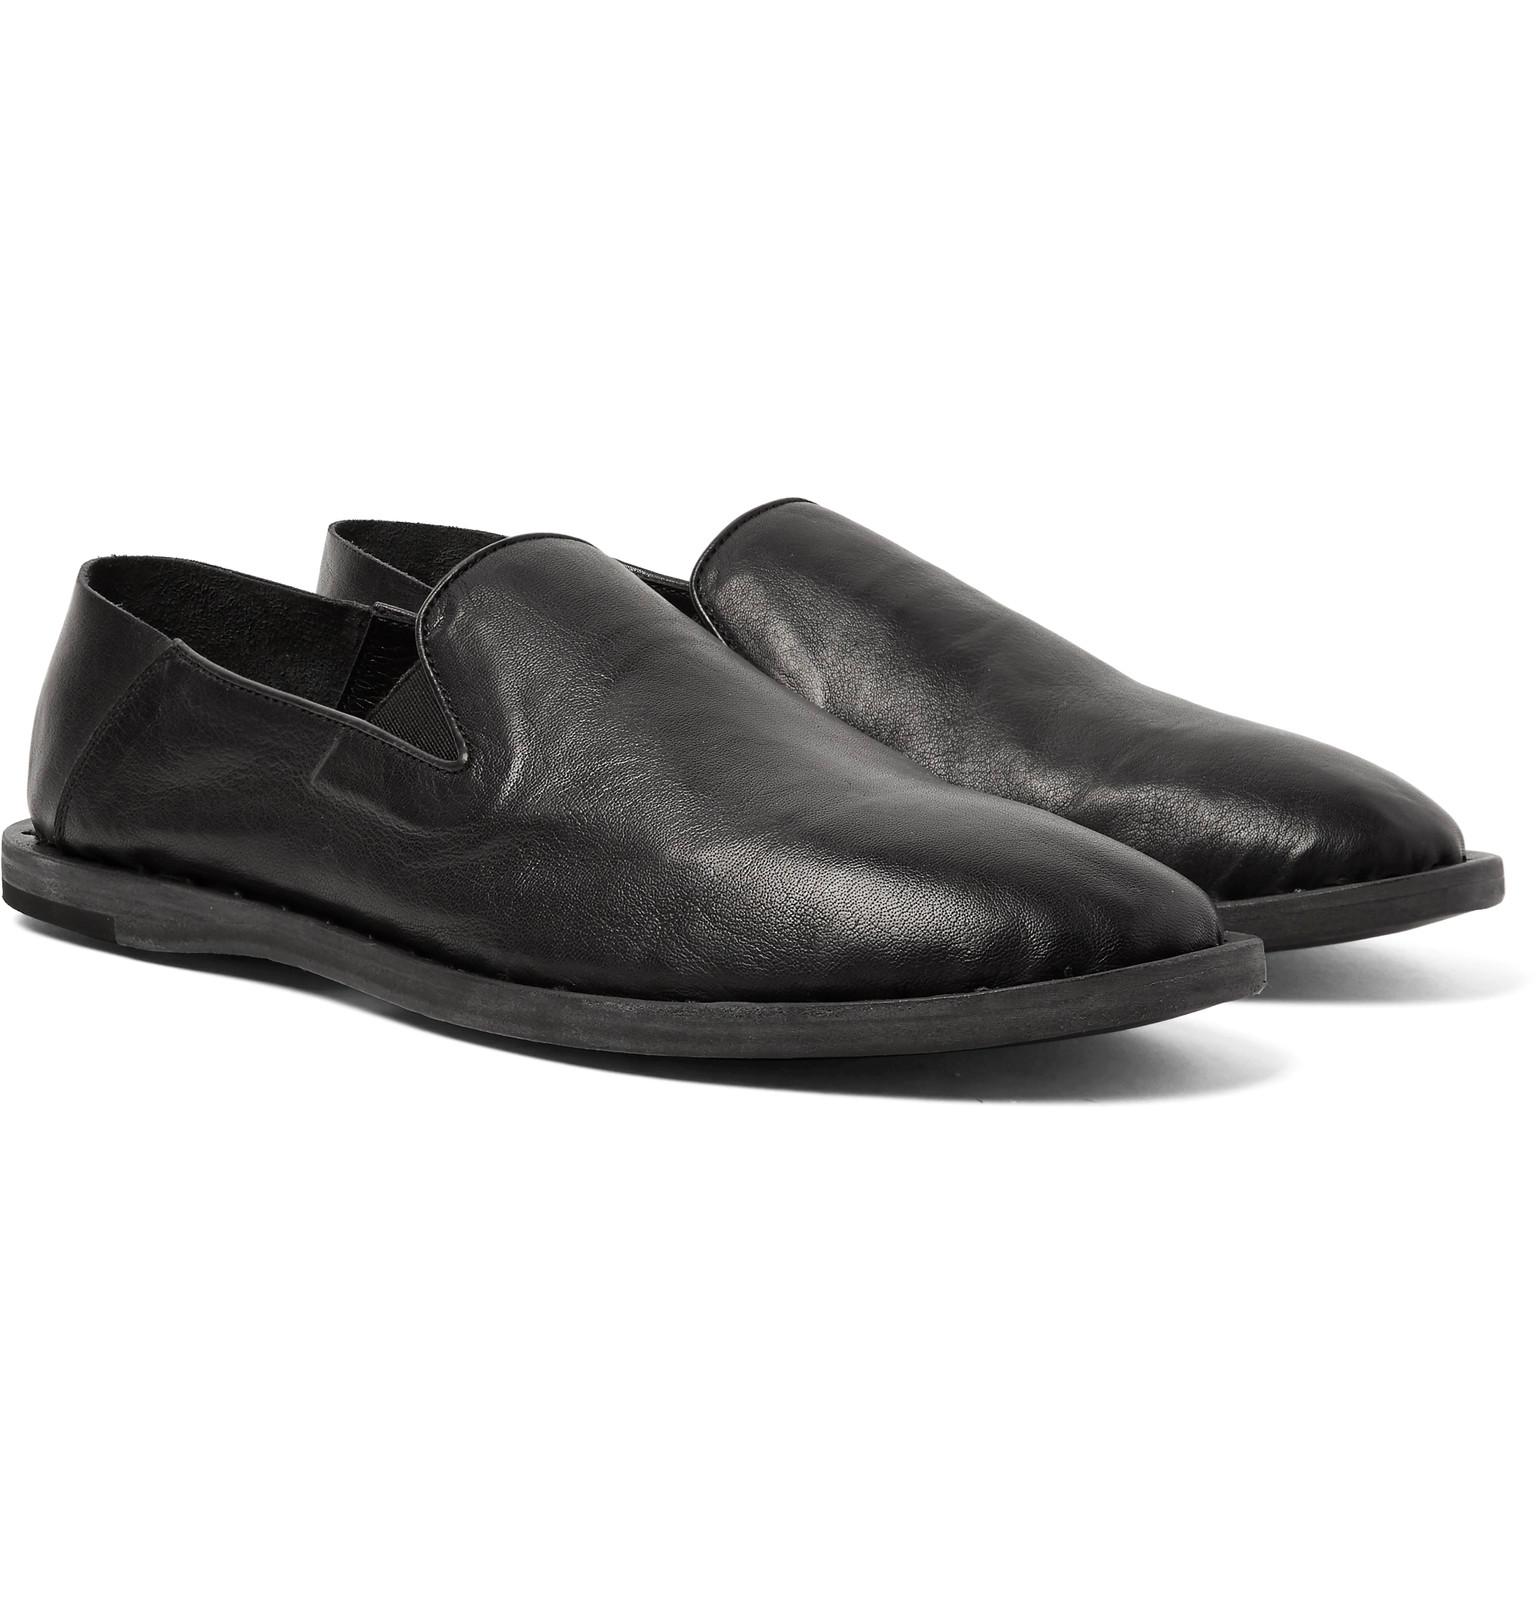 Officine Creative Felix Leather Loafers in Black for Men - Lyst